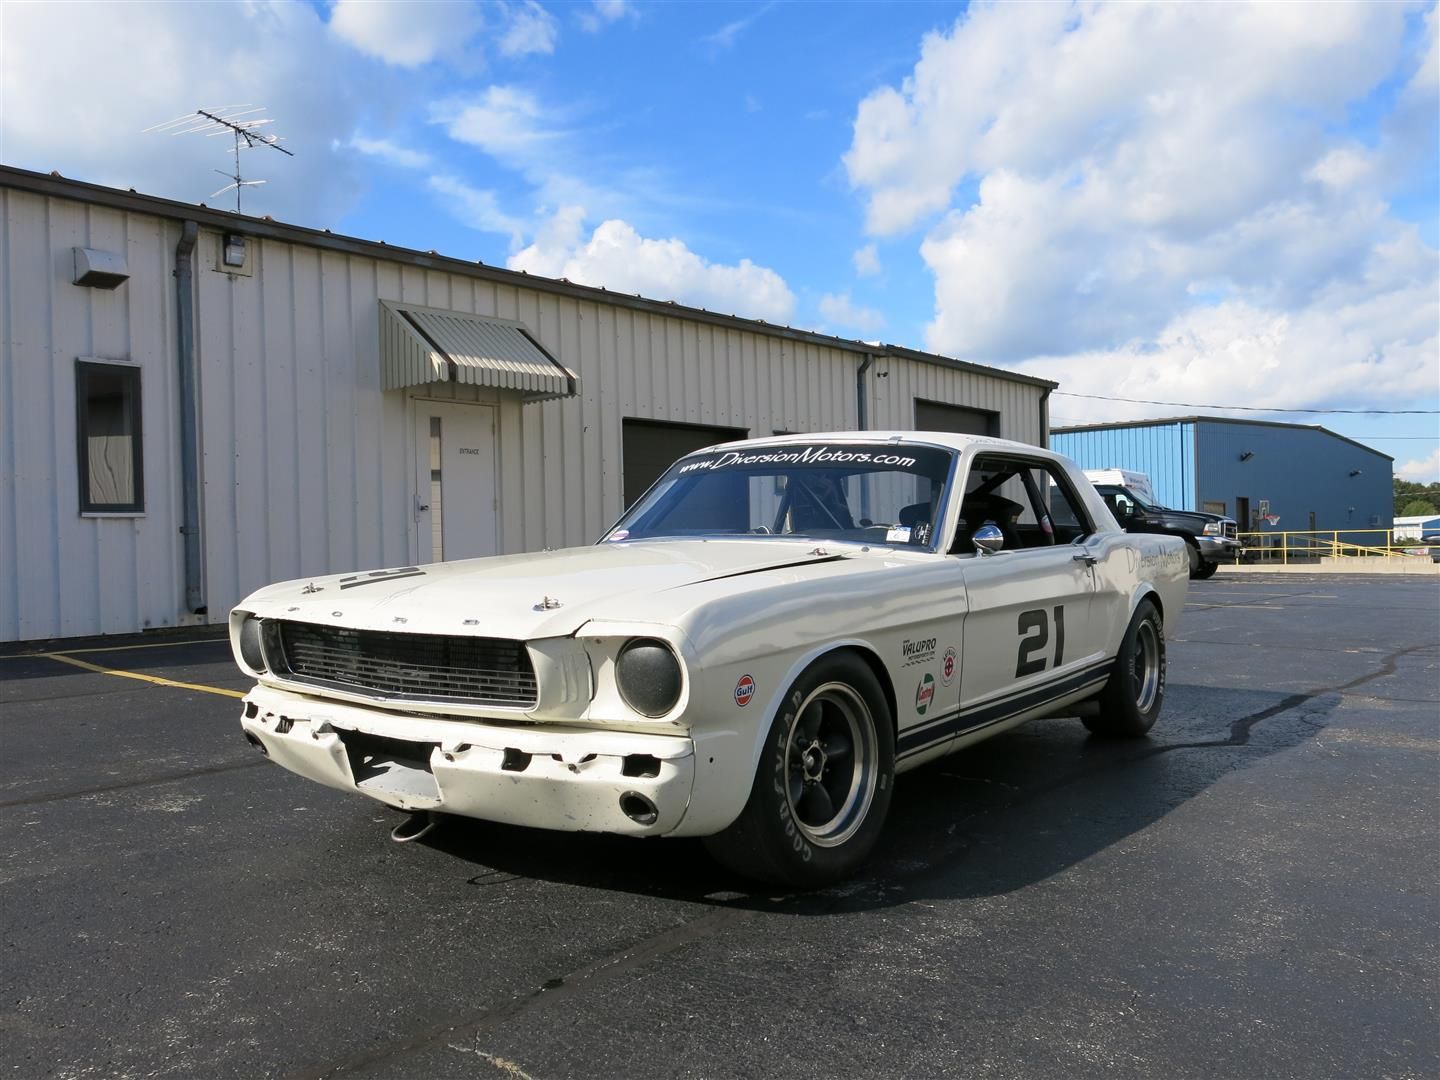  Ford Mustang Road Racer